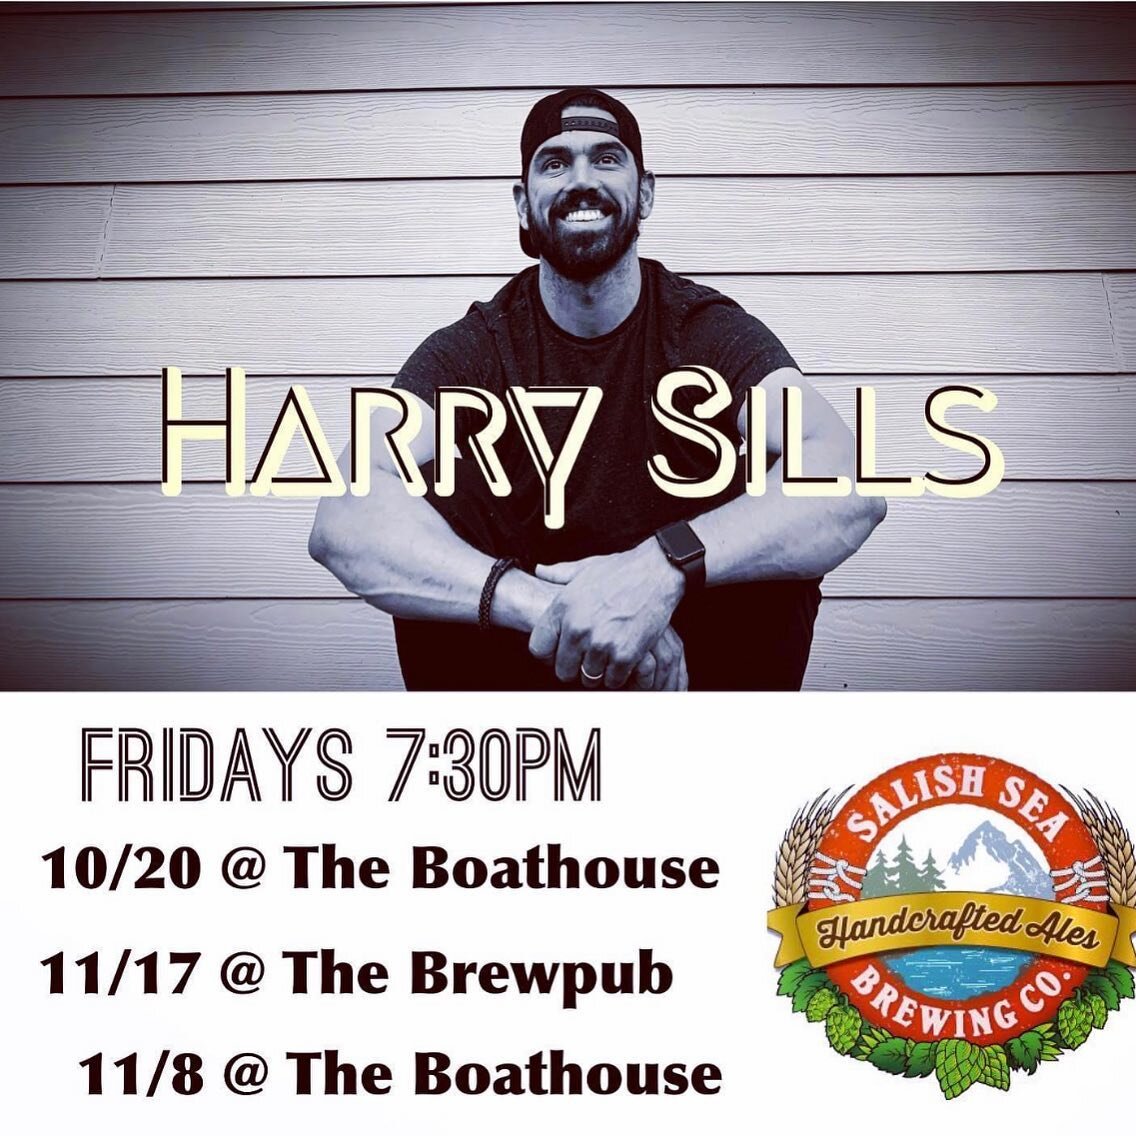 Join us as we welcome @harrysills back to The Boathouse tomorrow night 10/20 and Friday 11/8.

Harry will also be playing at the Salish Brewpub on Friday 11/17.